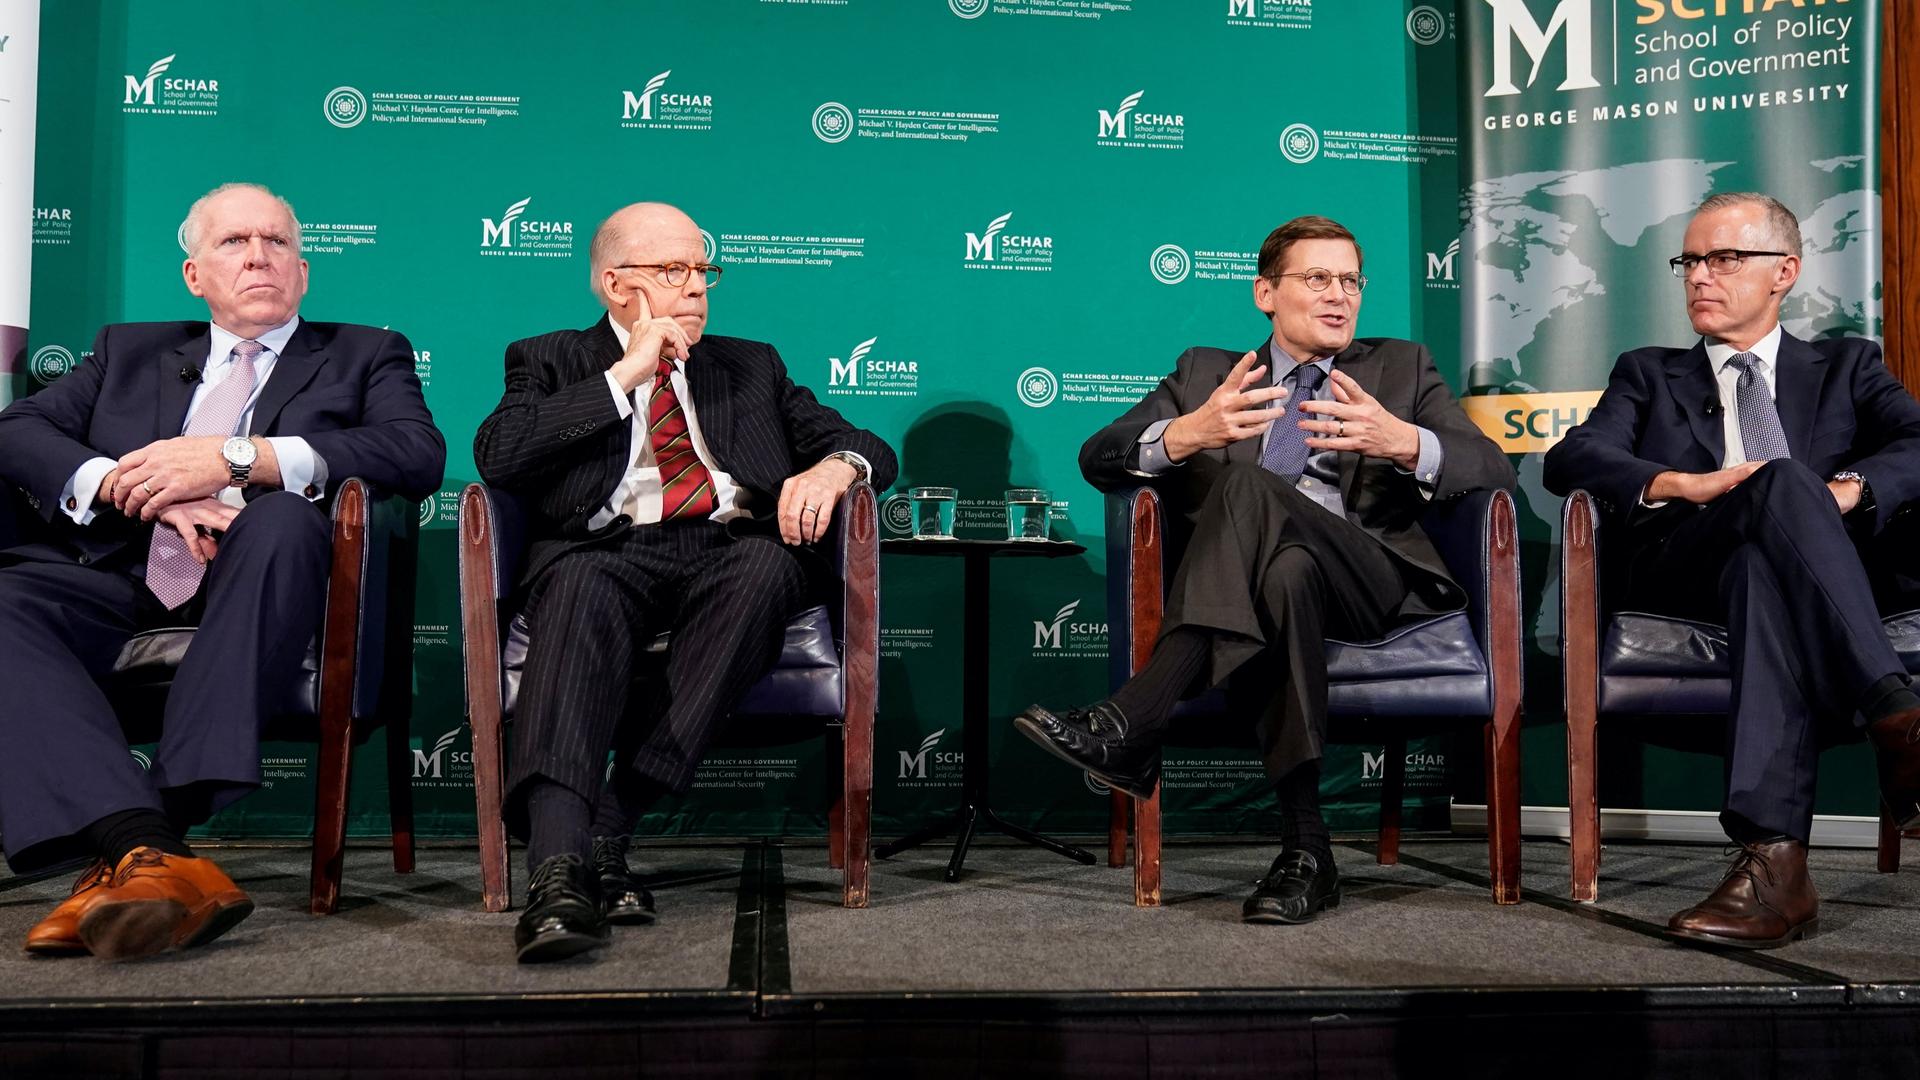 Four white men in suits sit on a panel with a green background